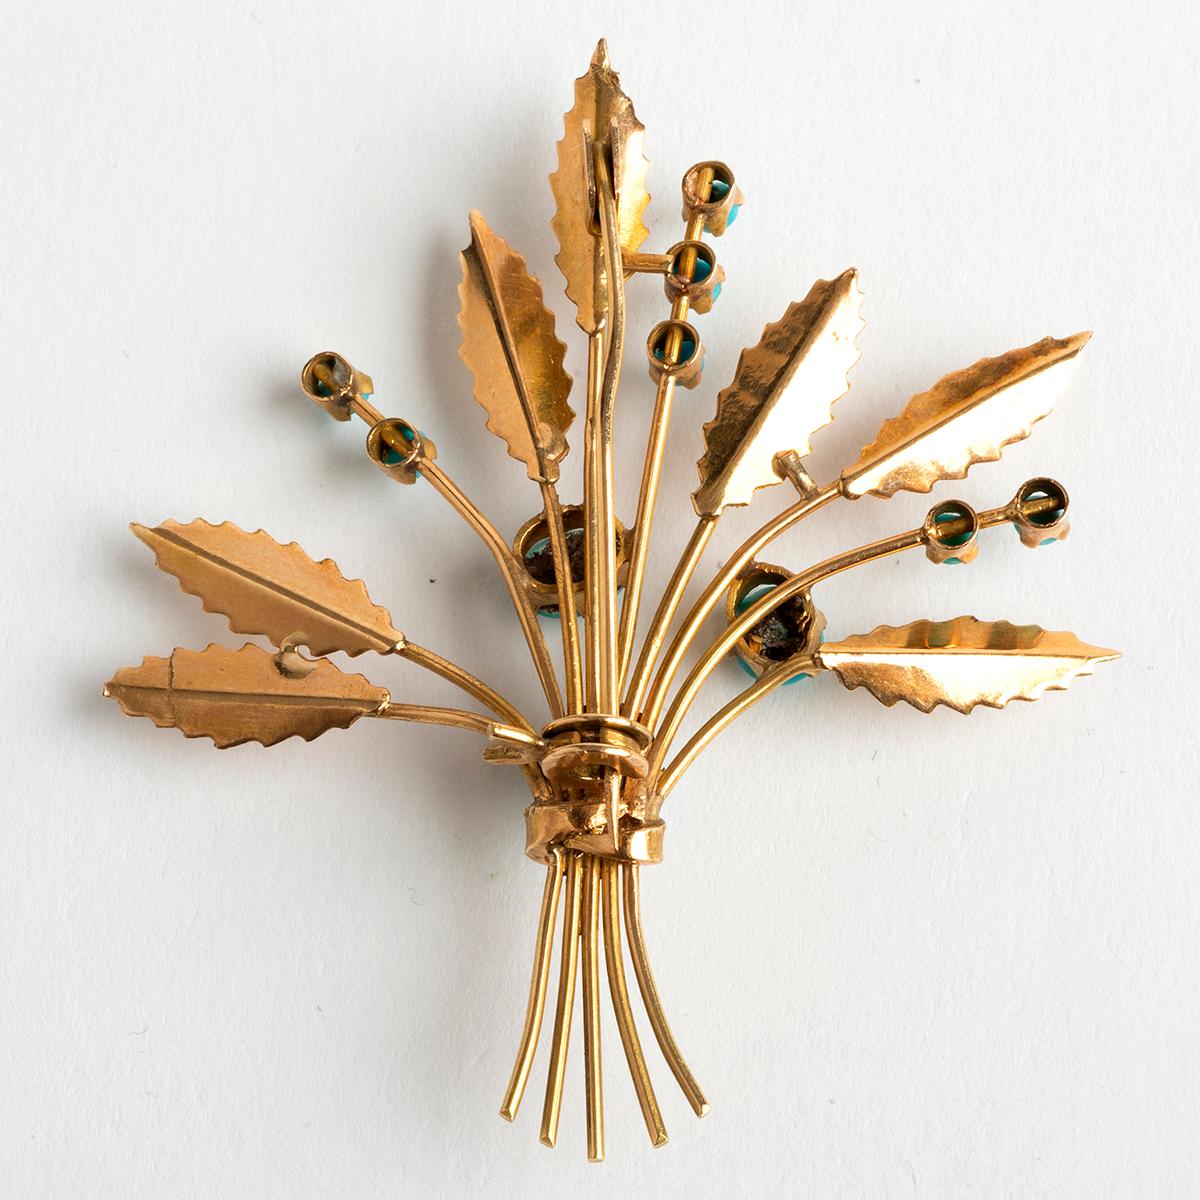 A unique piece within our carefully curated Vintage & Prestige fine jewellery collection, we are delighted to present the following:

Our wonderful antique gold brooch of 15carat yellow gold in the shape of a floral spray / display features 12